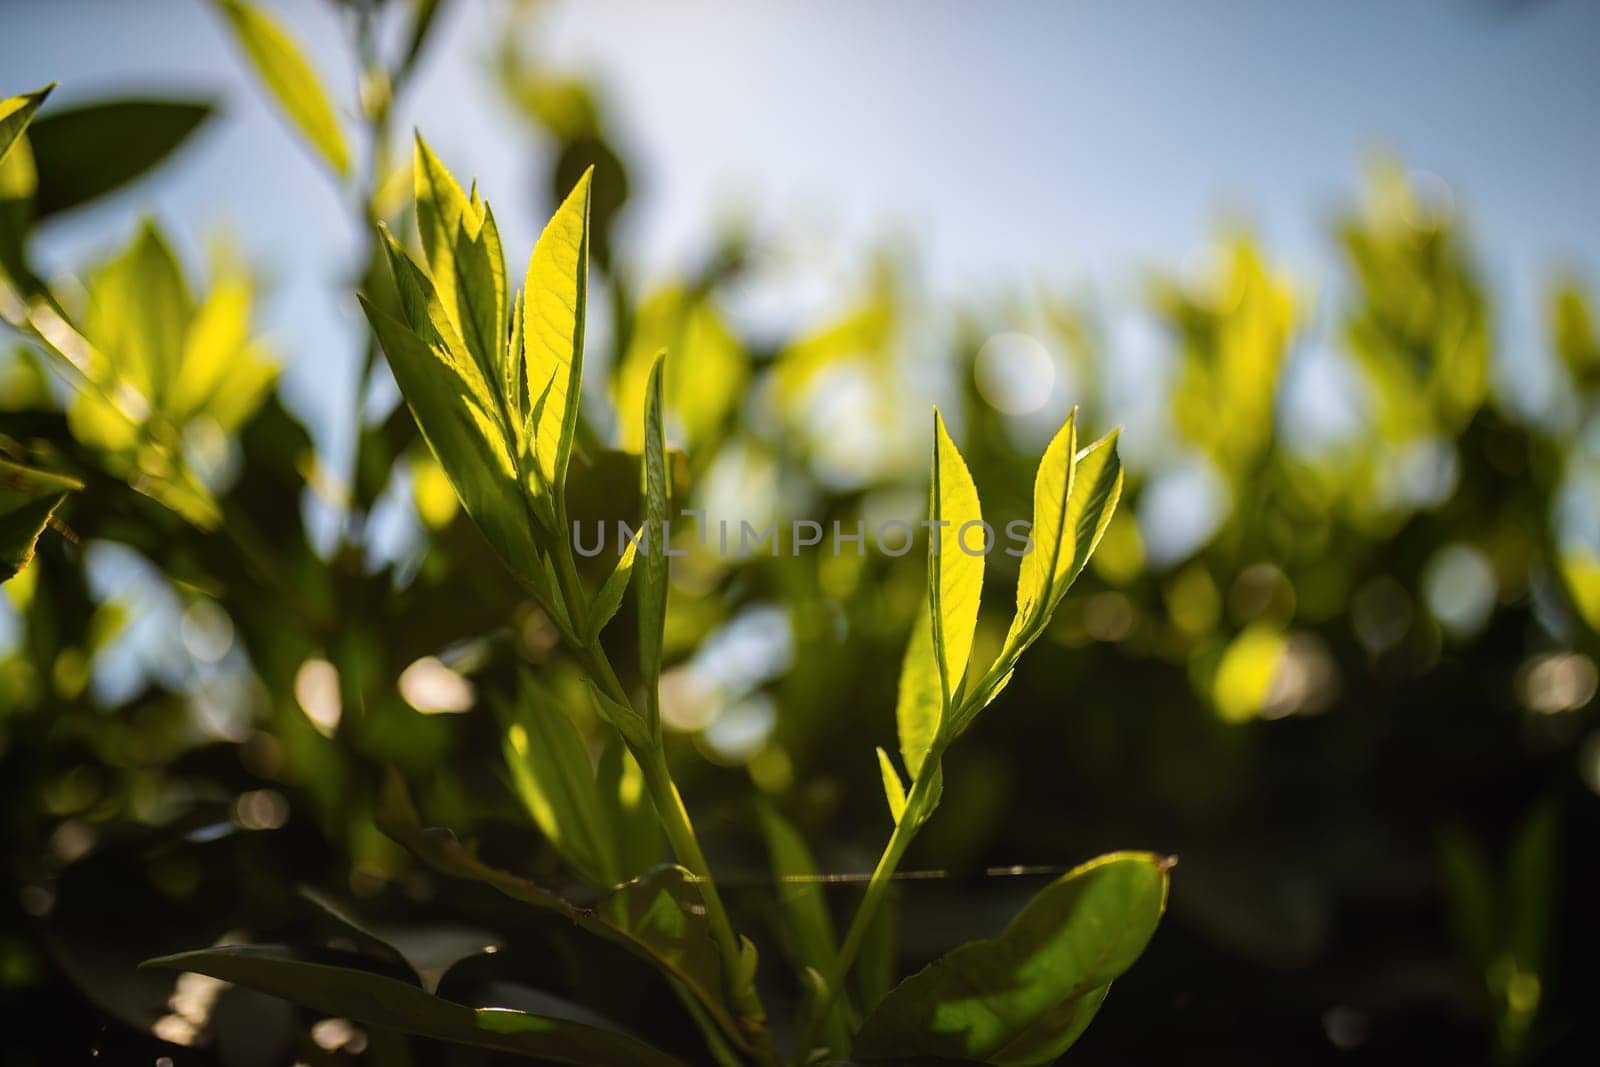 Detailed view of a green plant with vibrant leaves in focus.